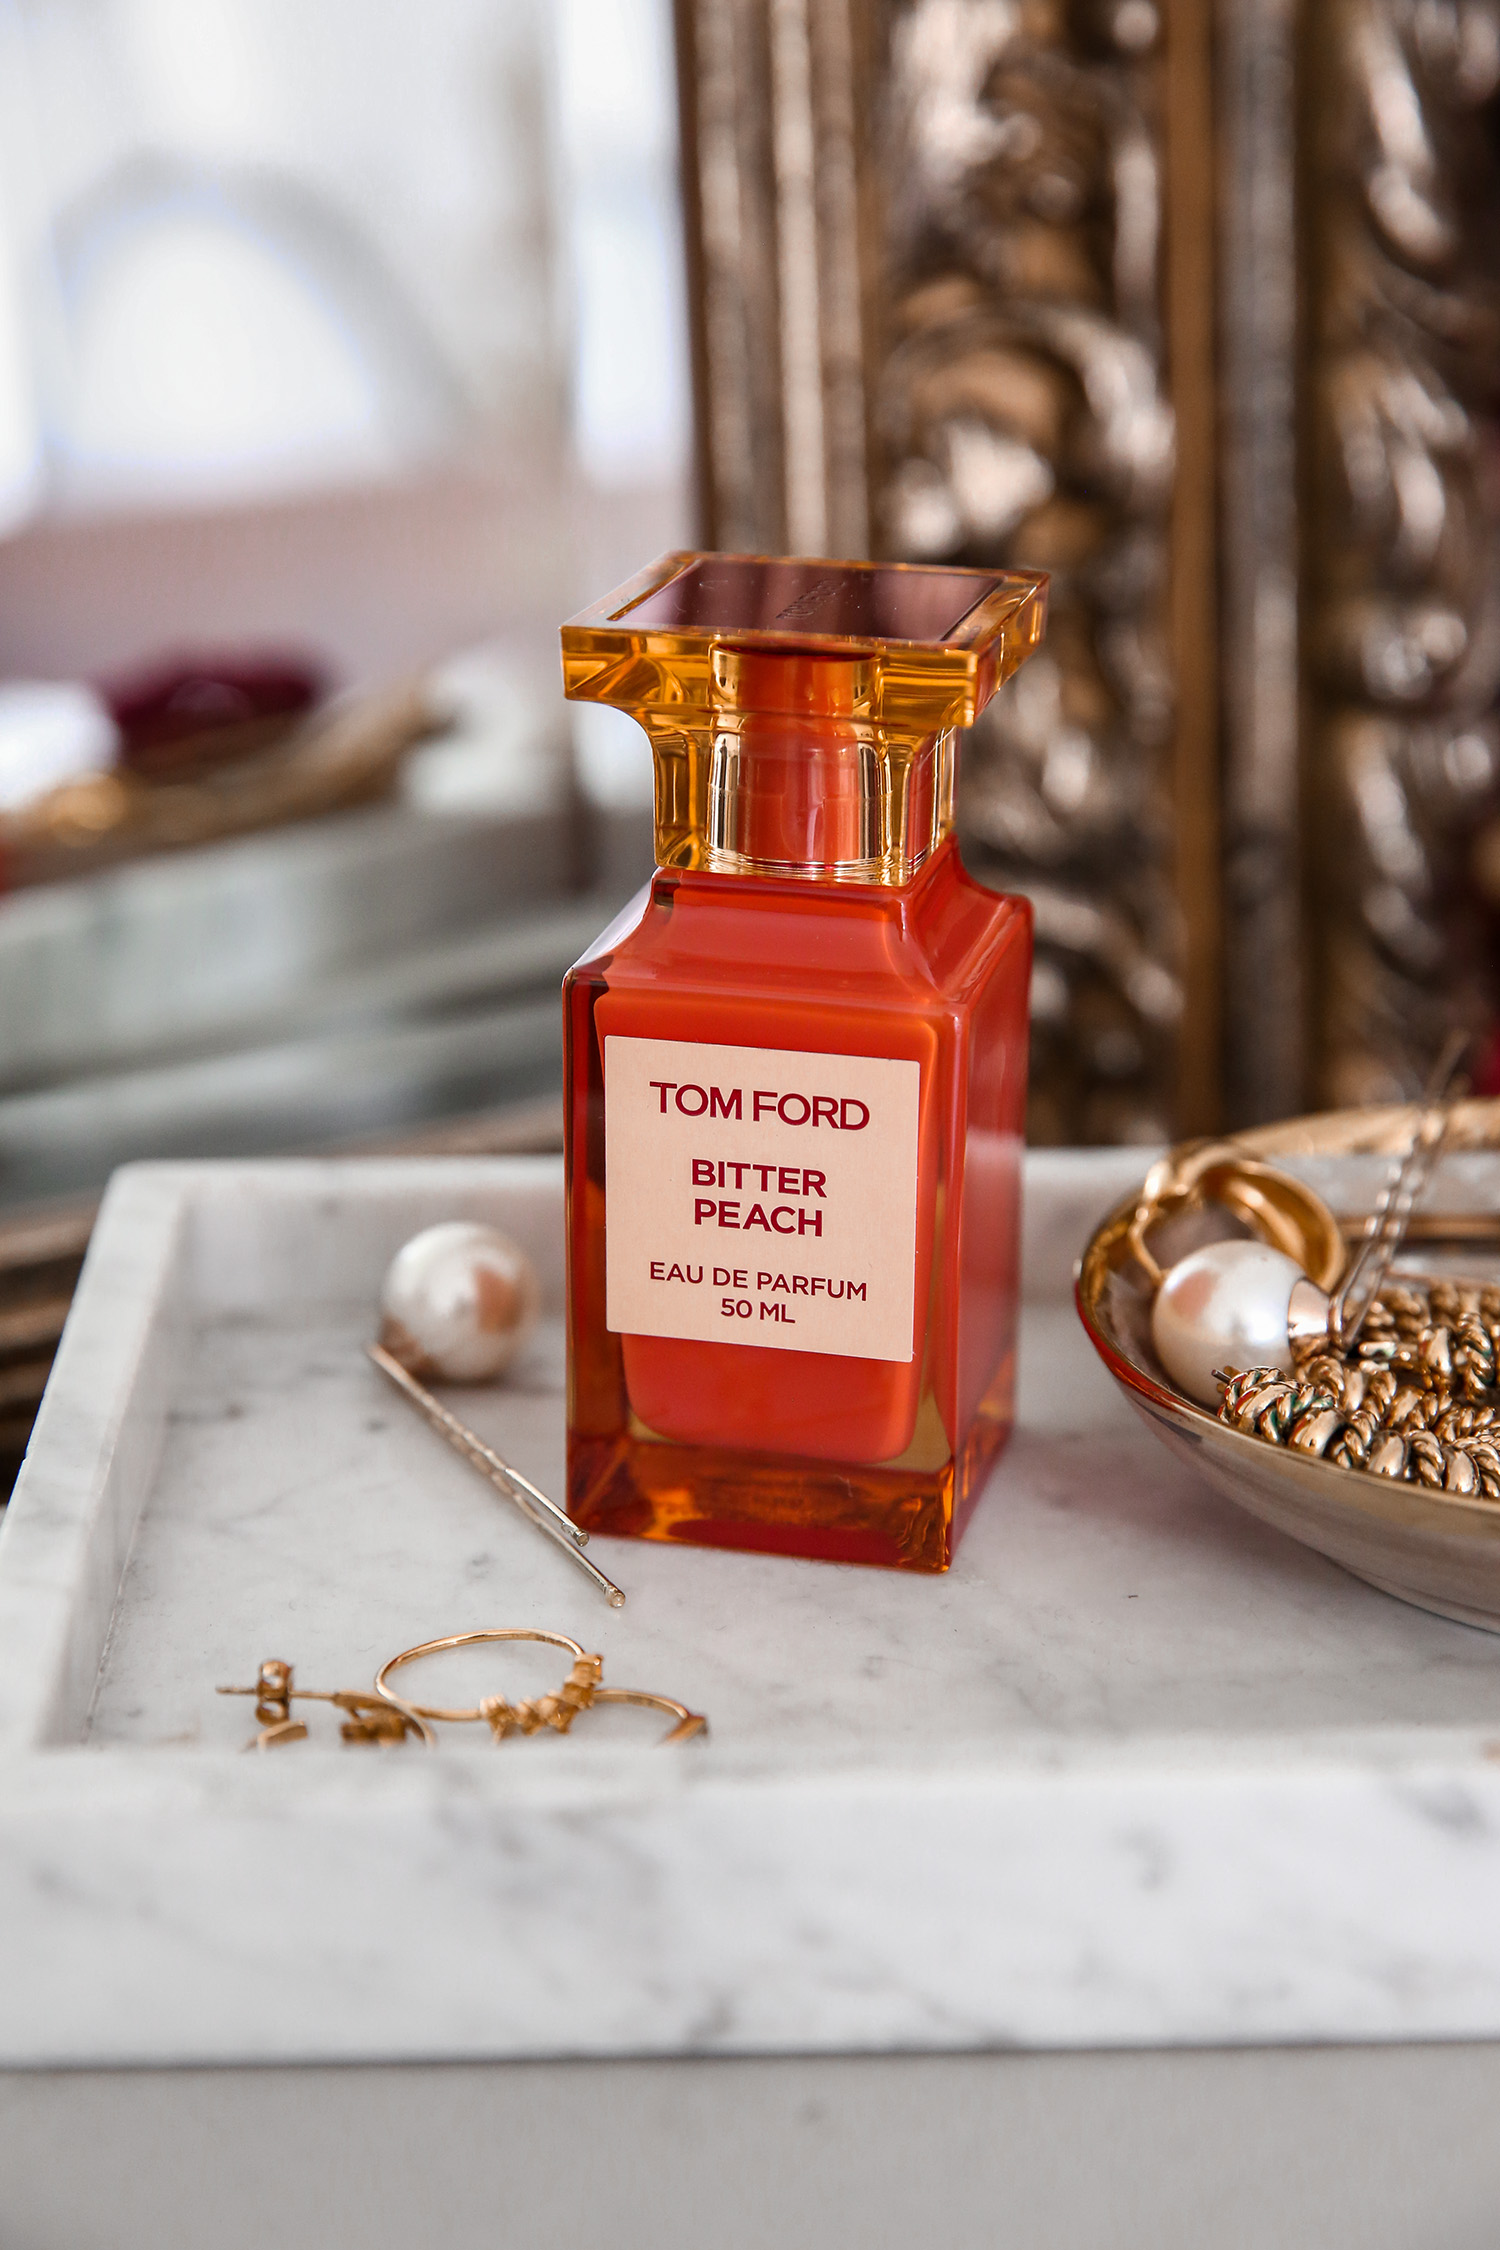 Tom Ford Bitter Peach EDP Review